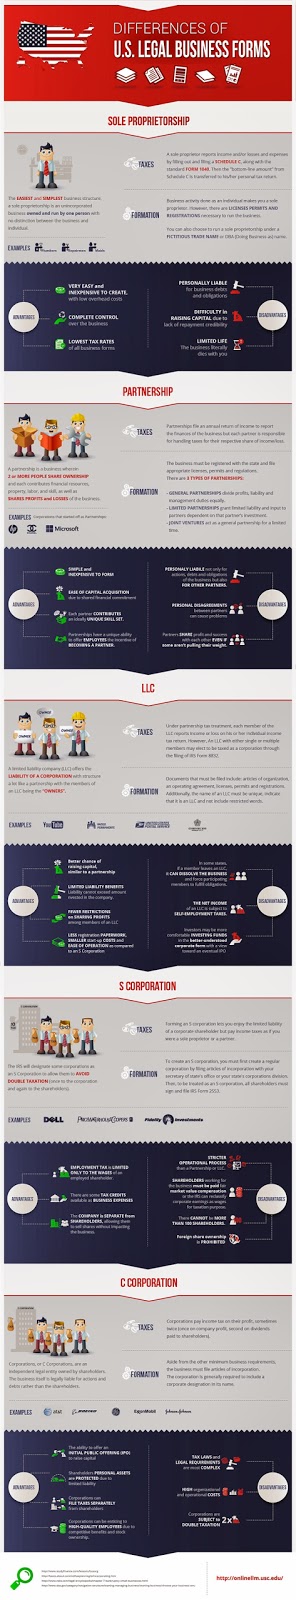 http://www.entrepreneur.com/dbimages/article/1403798960-how-incorporate-business-cheat-sheet-infographic.jpg